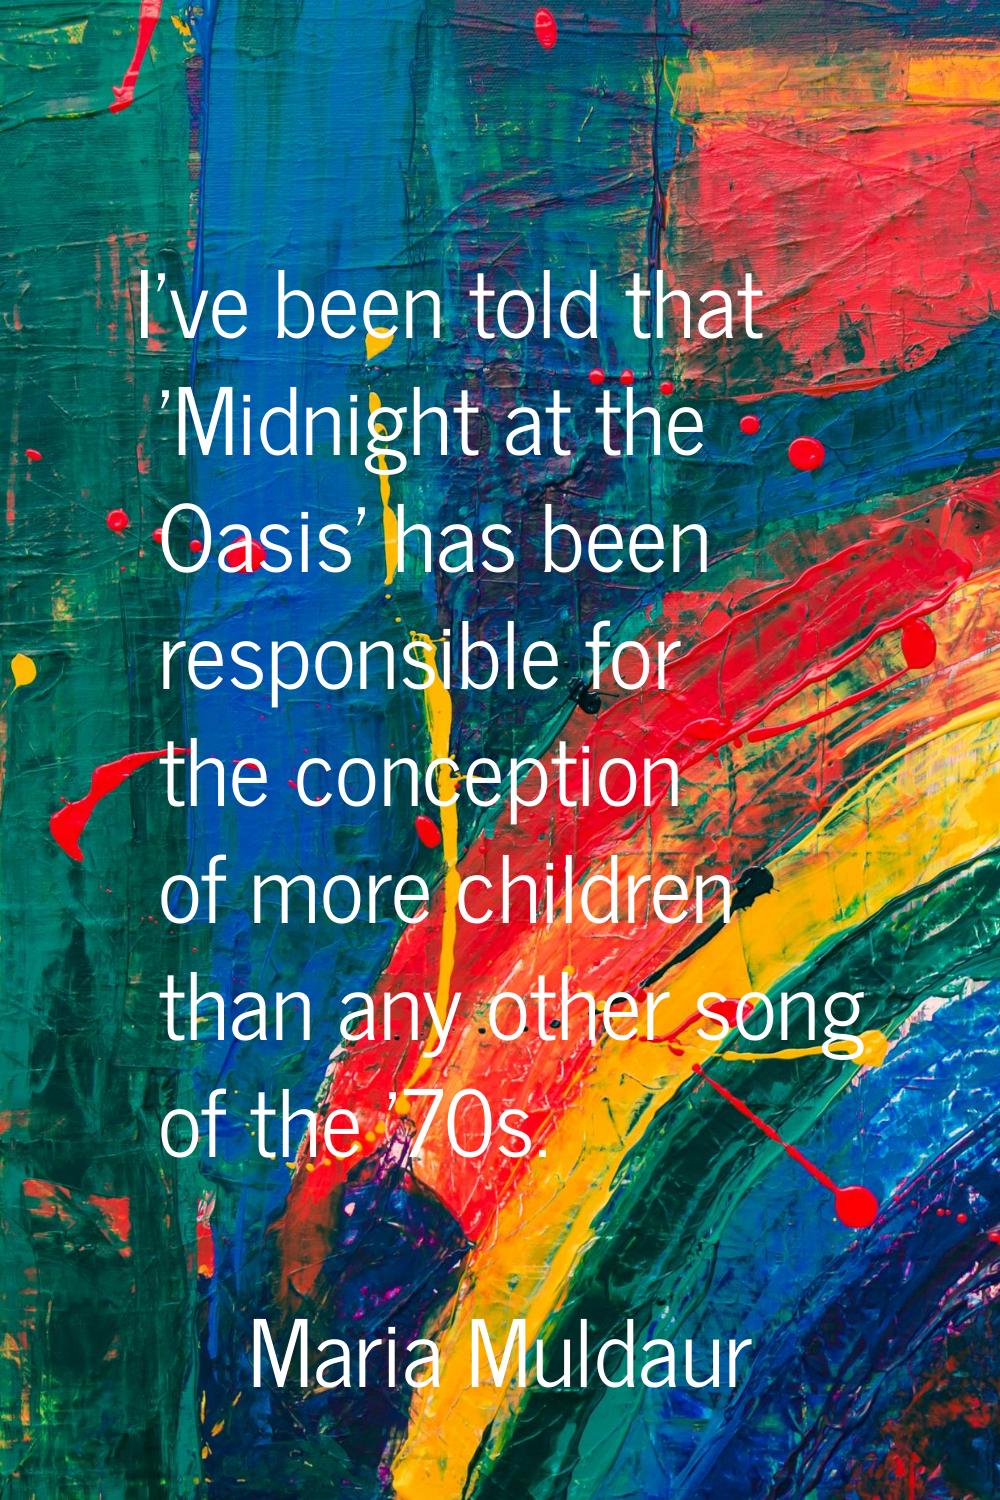 I've been told that 'Midnight at the Oasis' has been responsible for the conception of more childre